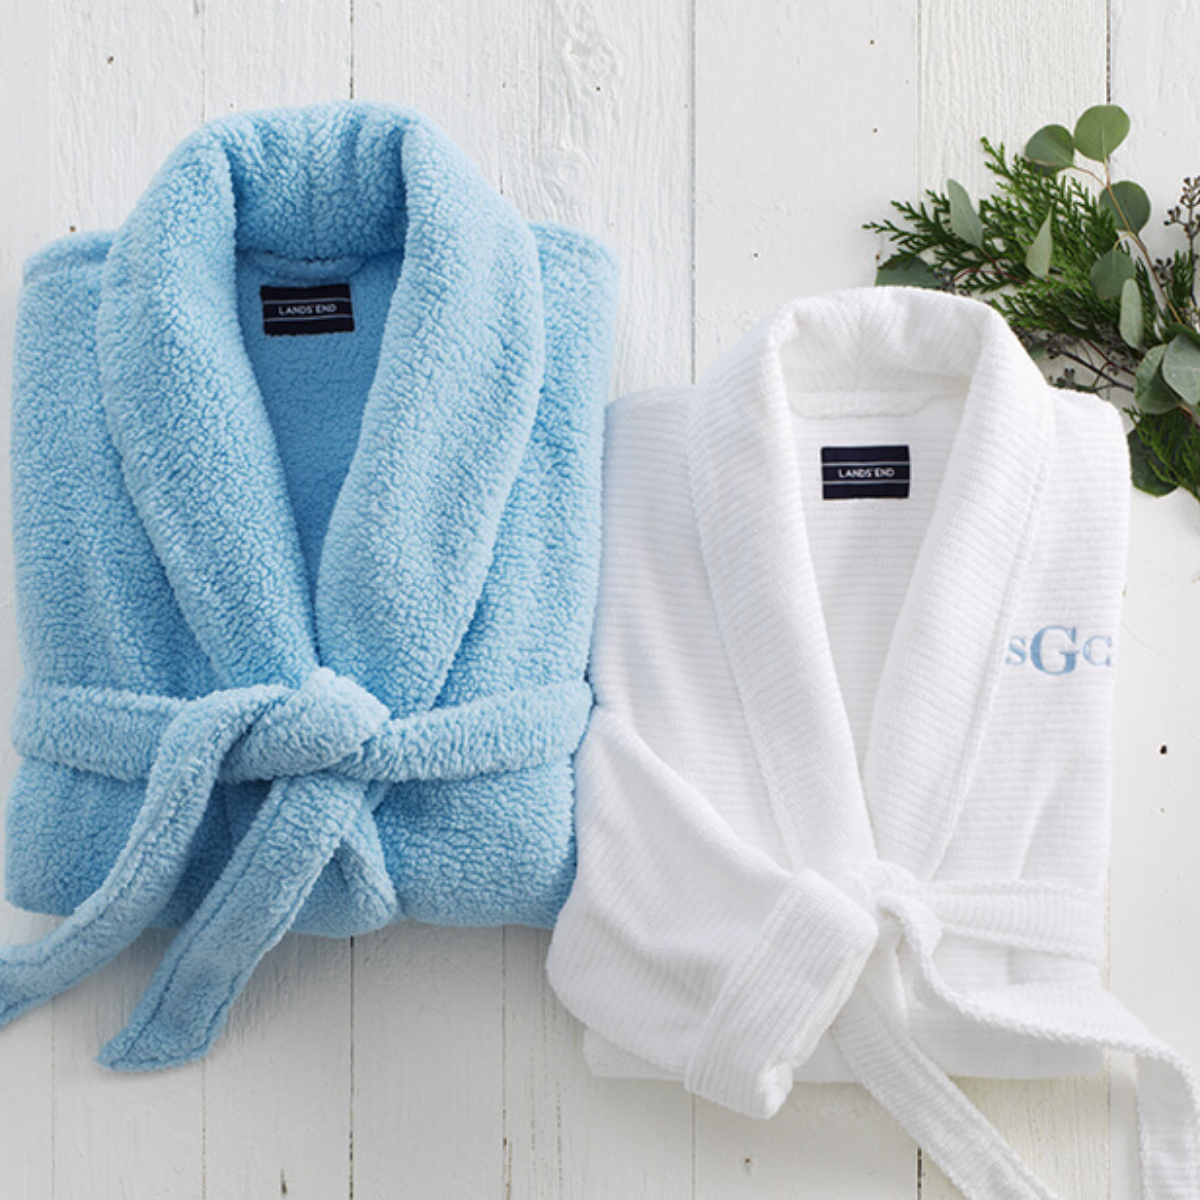 24. Indulge Him with a Personalized Monogrammed Bathrobe - The Perfect Anniversary Gift